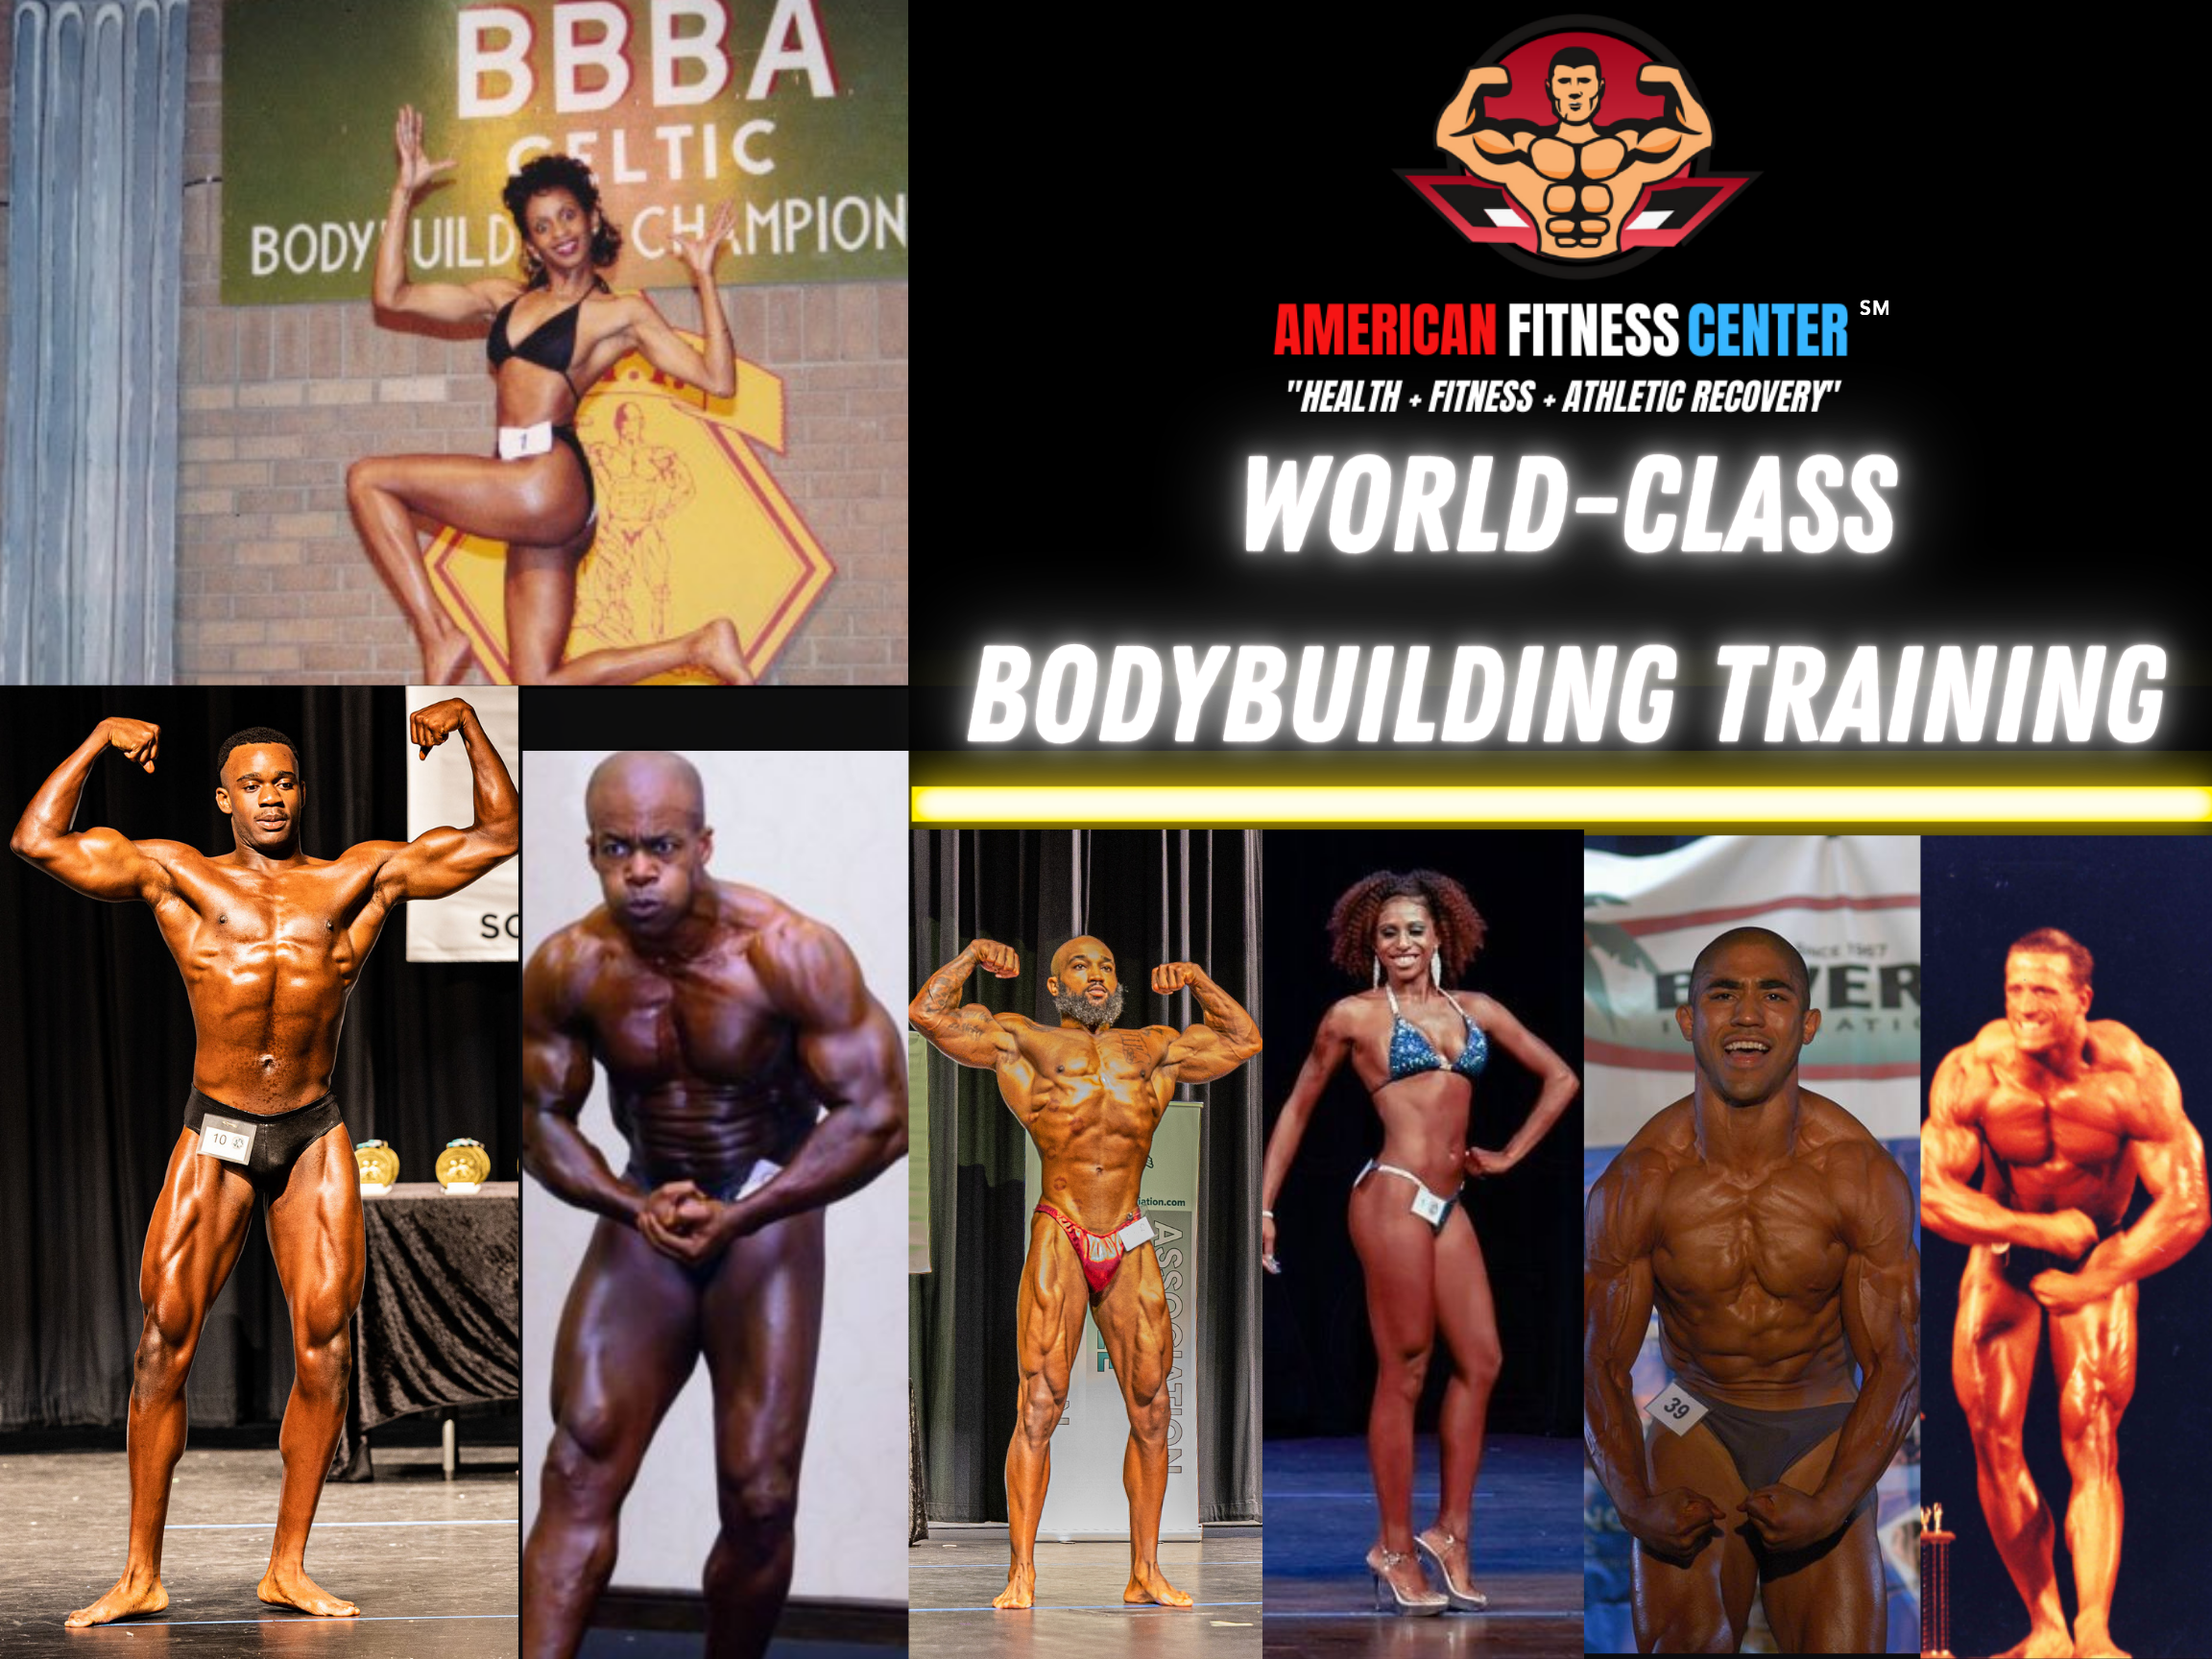 Best-Bodybuilding-Coach-In-Roswell-GA-American-Fitness-Center-West-Roswell-24 Hour Luxury Gym In Roswell